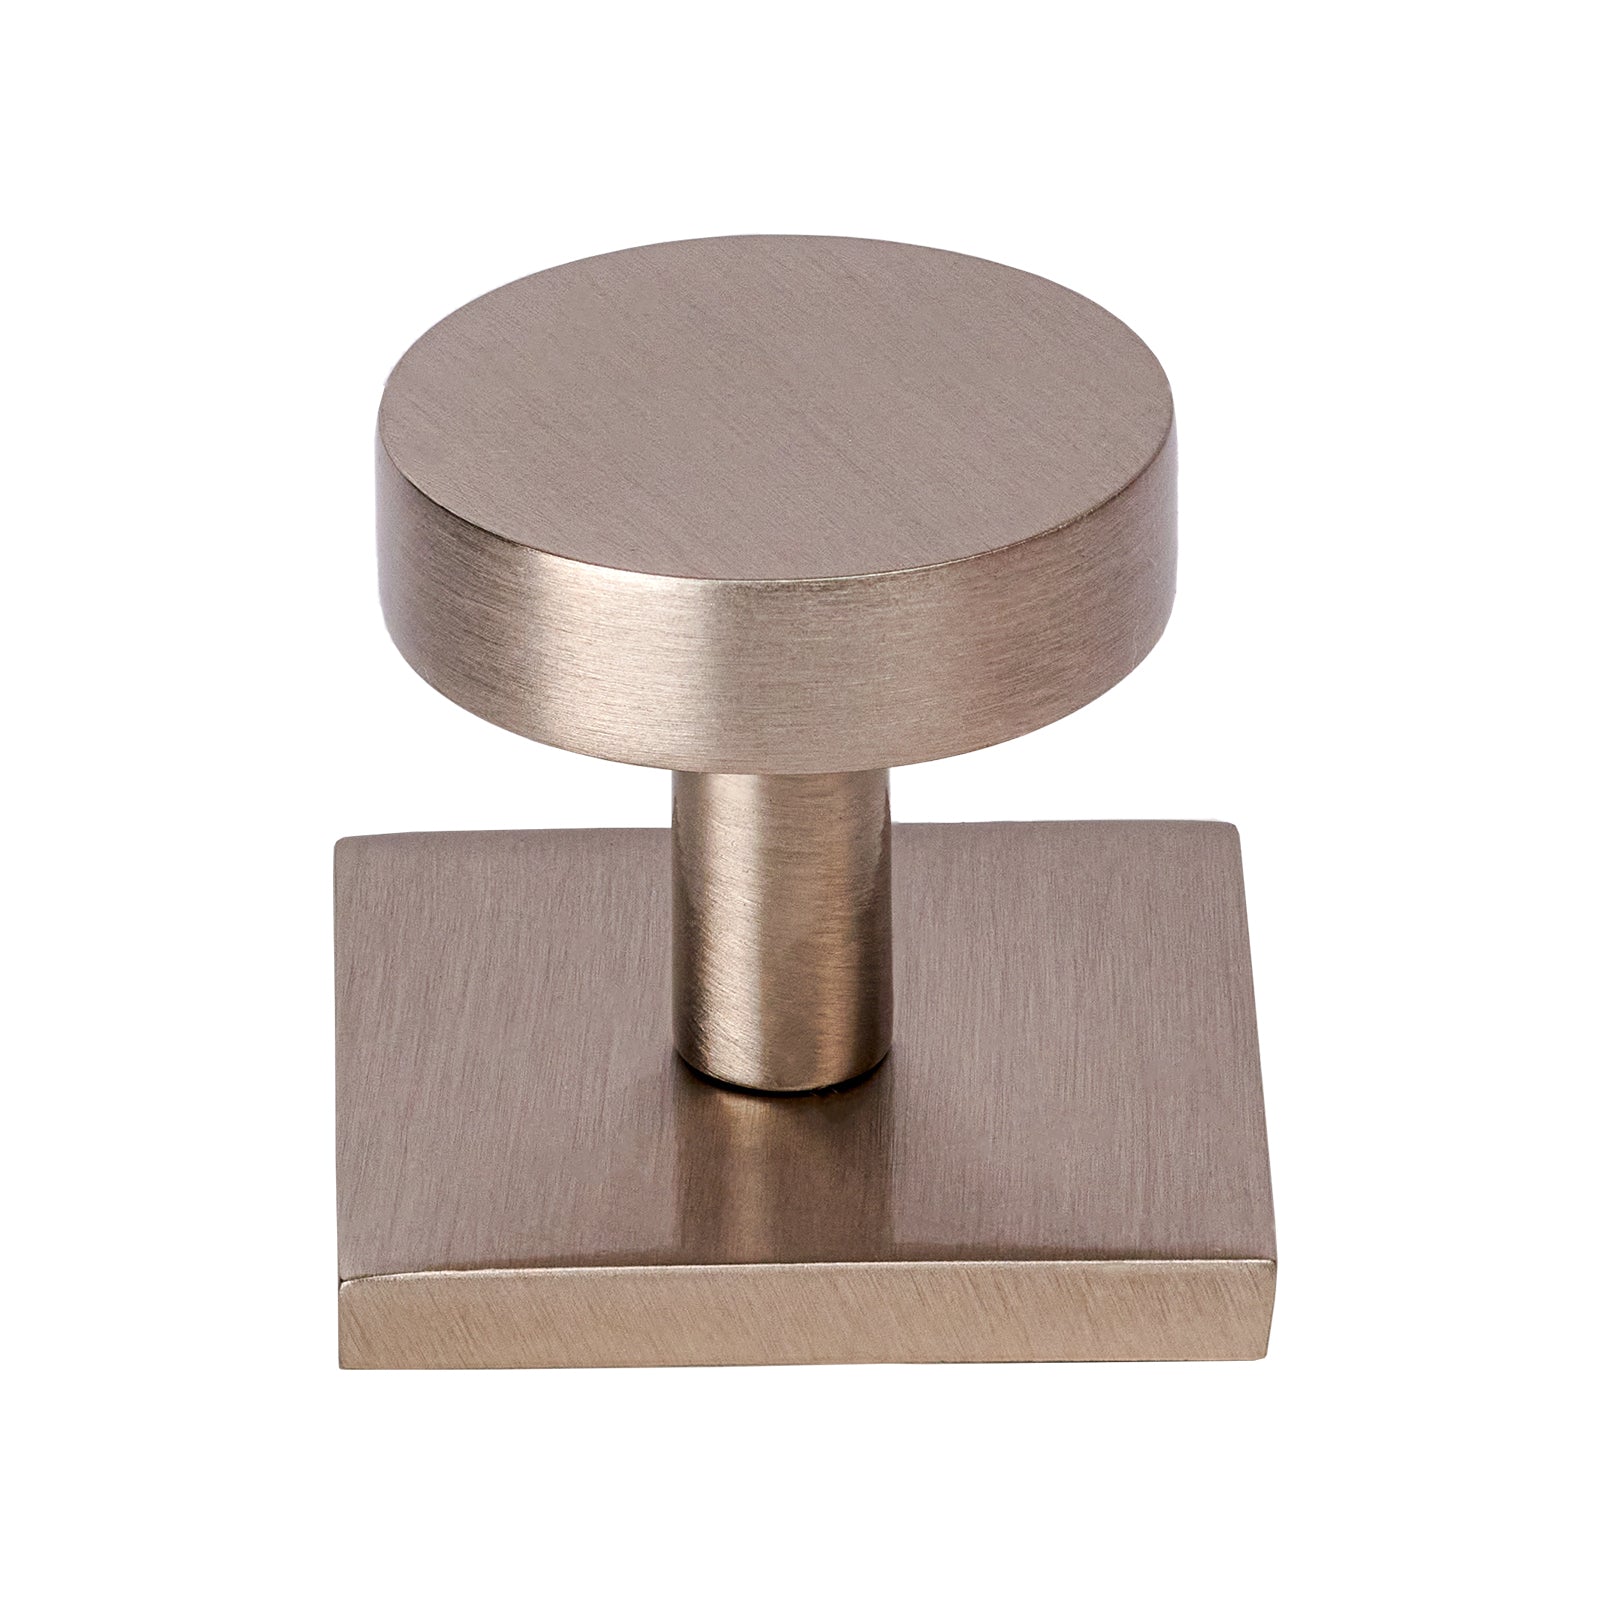 Satin Nickel disc cabinet knob on backplate SHOW